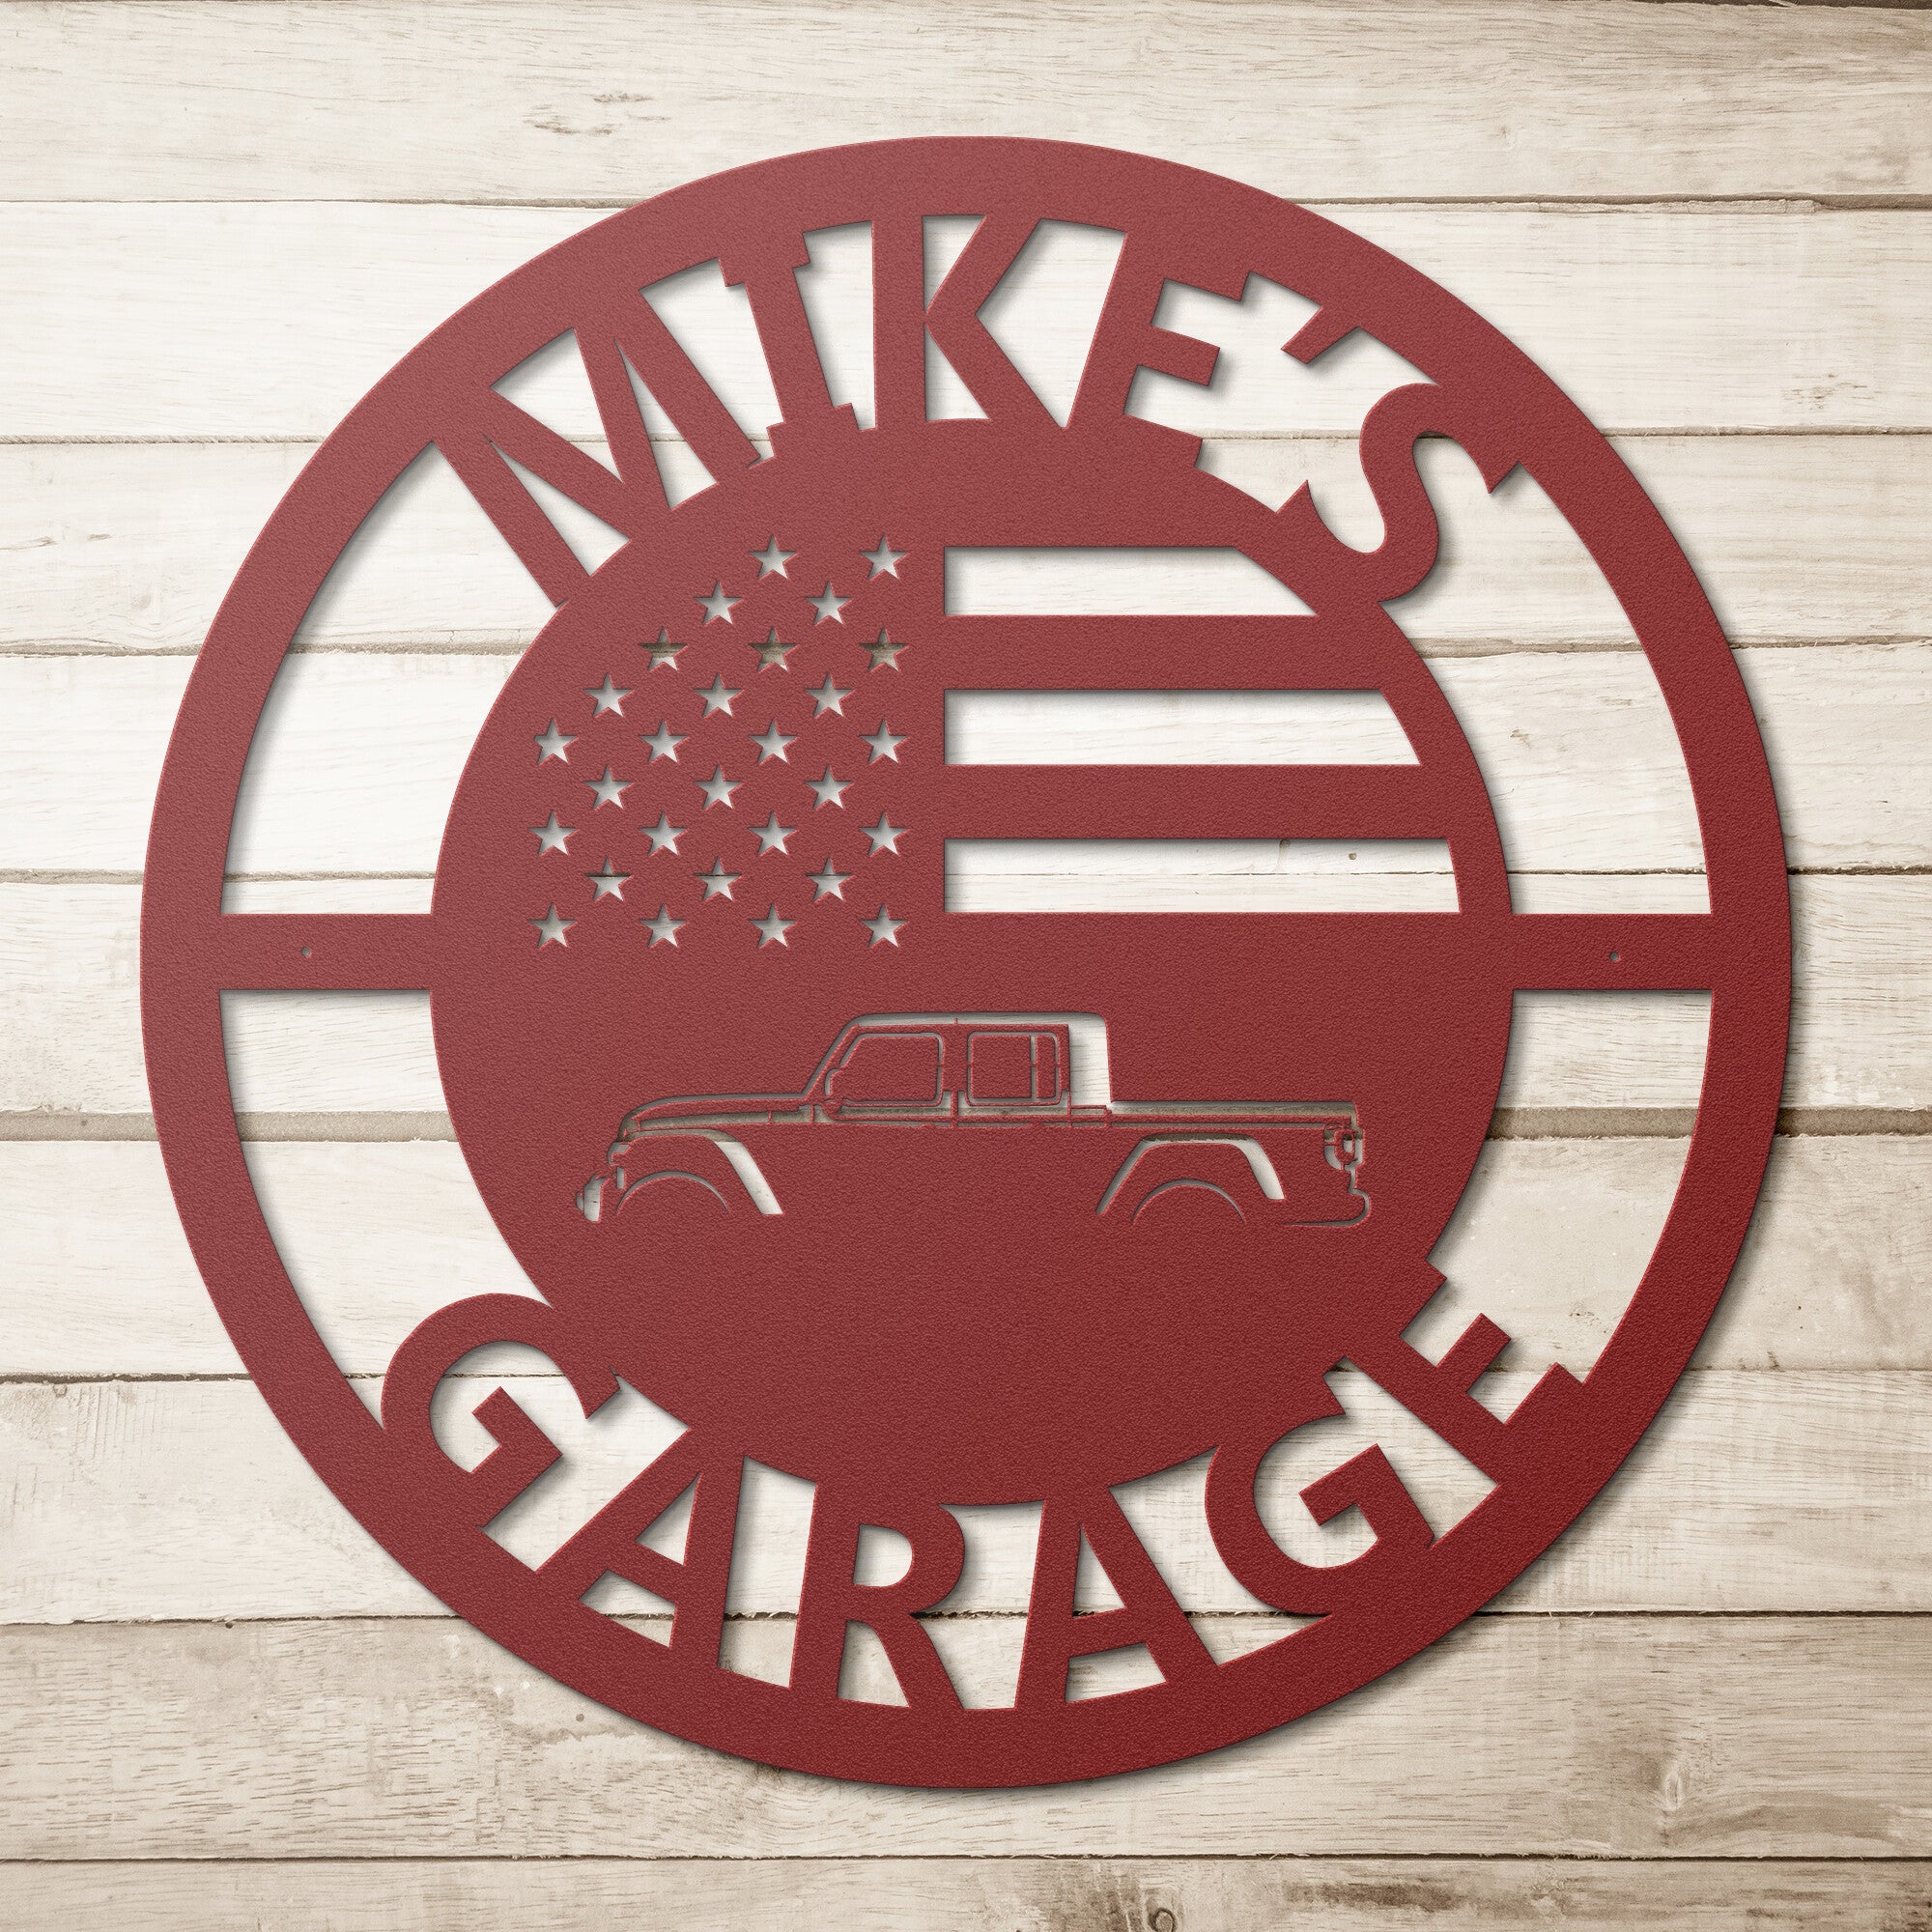 Personalized Gladiator Garage Sign - Cool Metal Signs